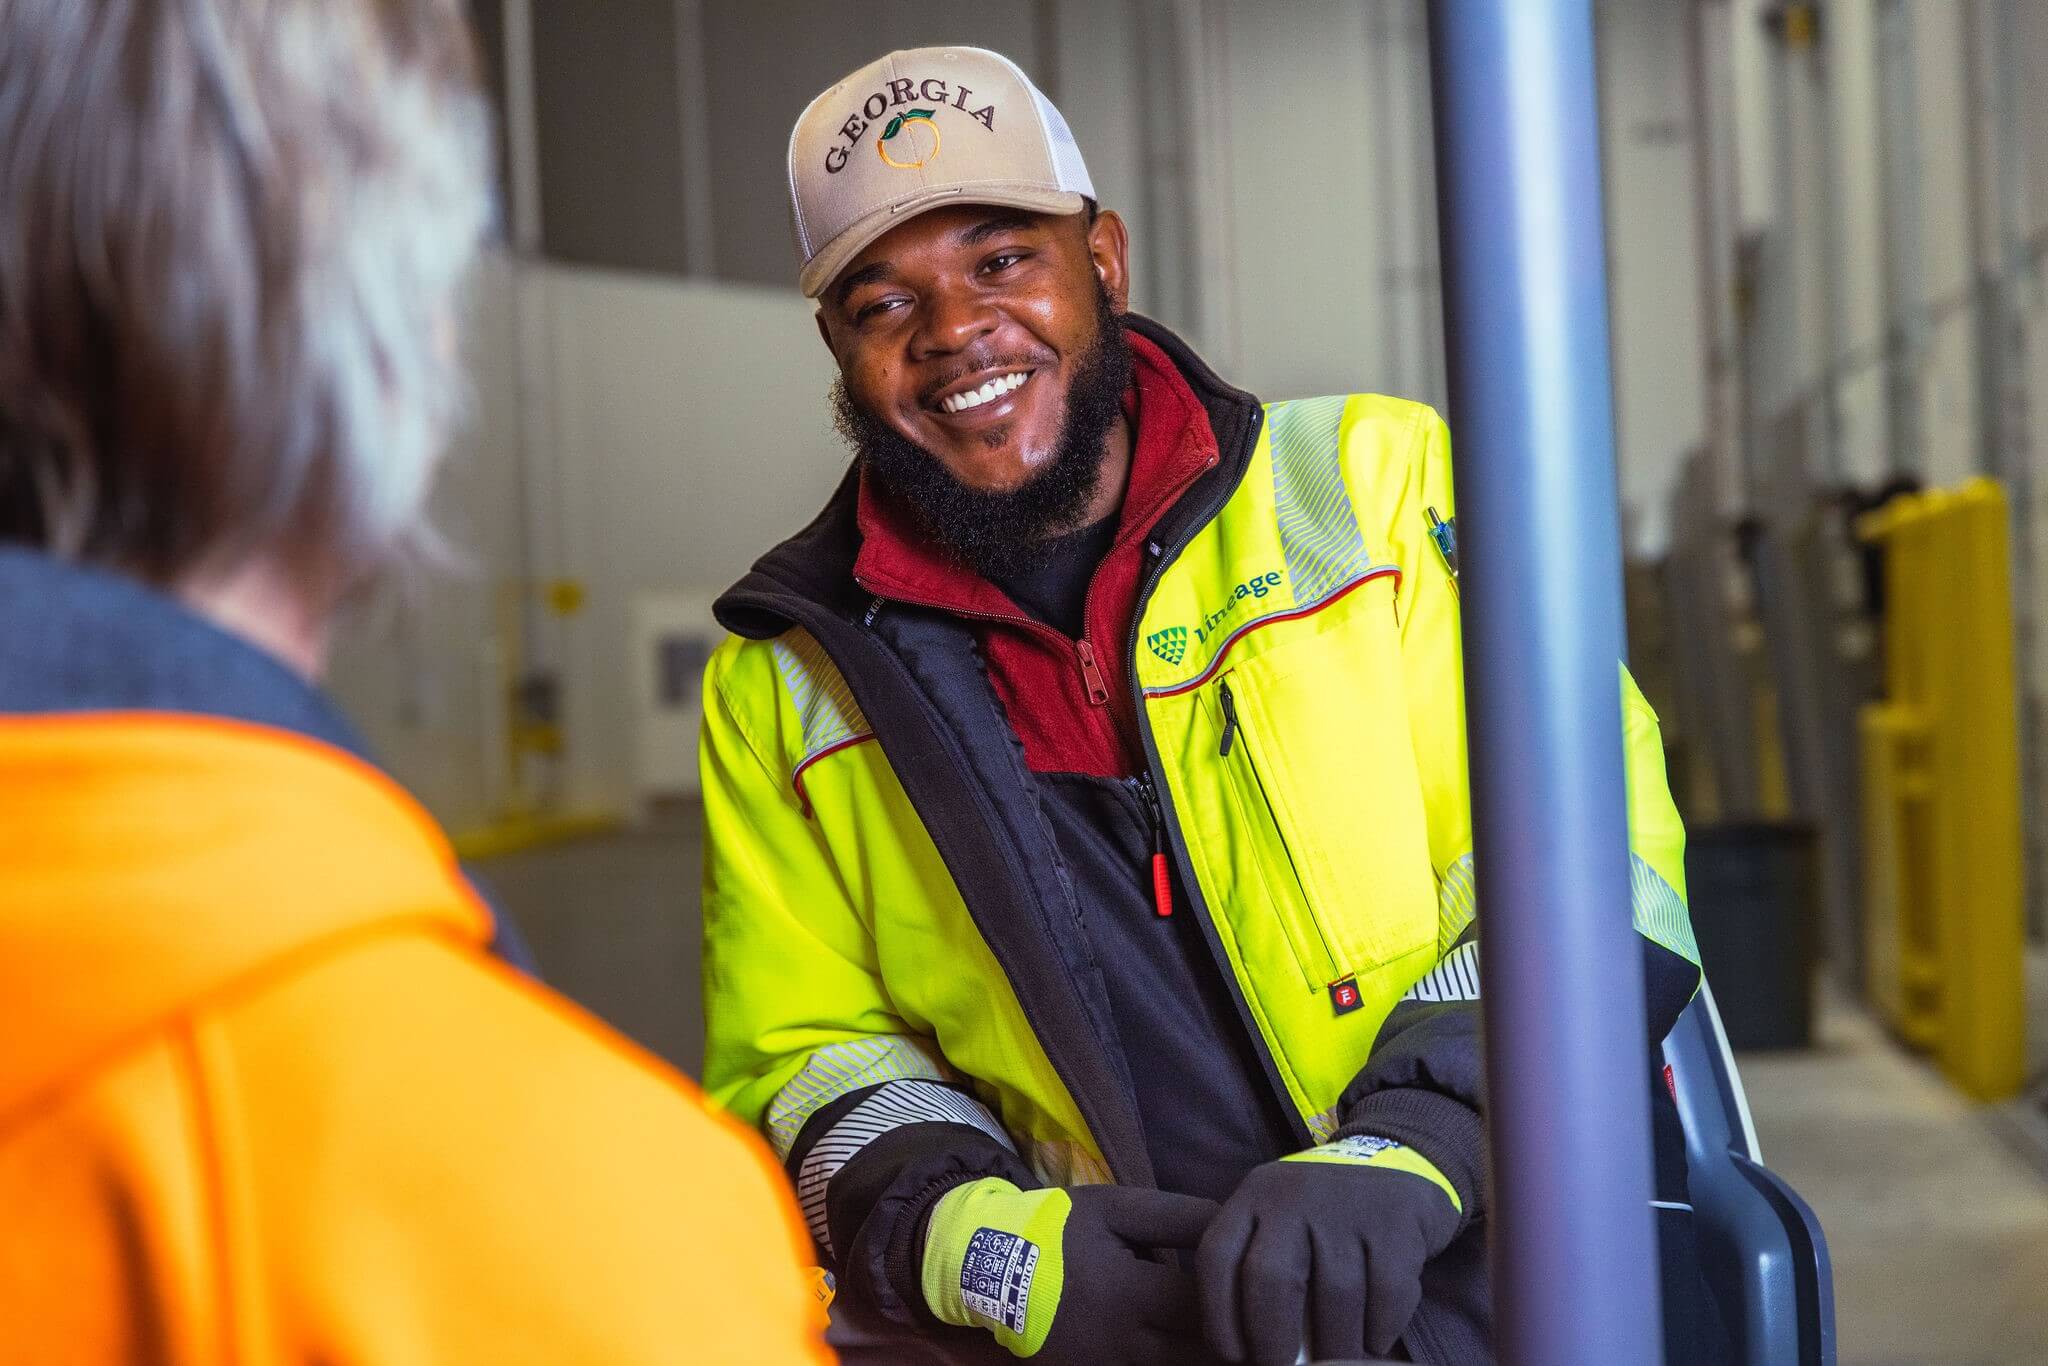 A smiling worker in a high-visibility jacket and 'Georgia' cap talking to a colleague in a warehouse.